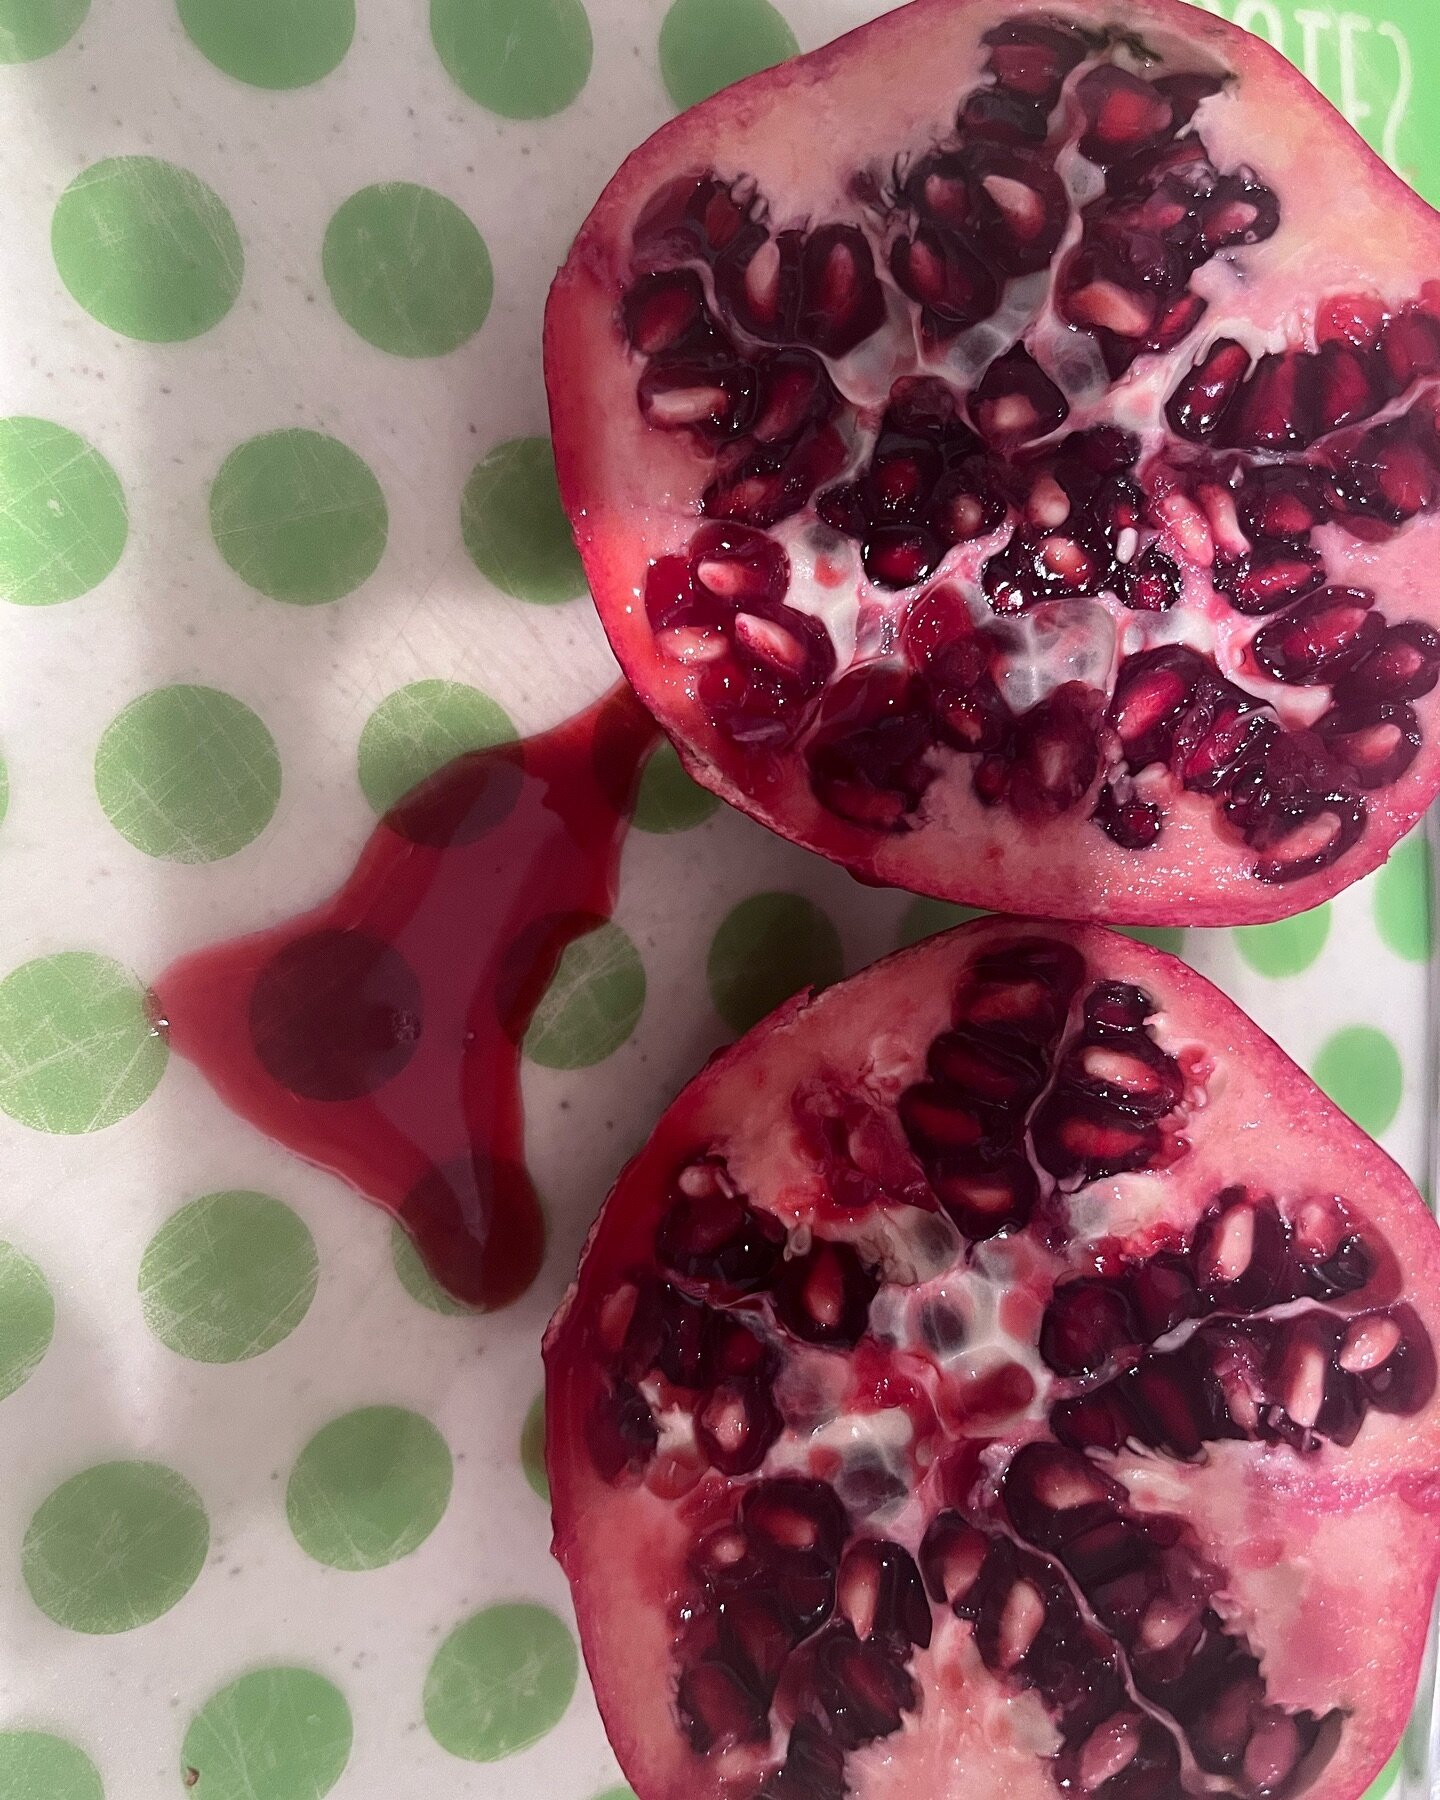 We harvested the last of our pomegranates this past week and intended to reduce what was remaining on the tree however discovered we had some small to medium pomegranates without cracks that are beautiful, and our customers may want to purchase them.